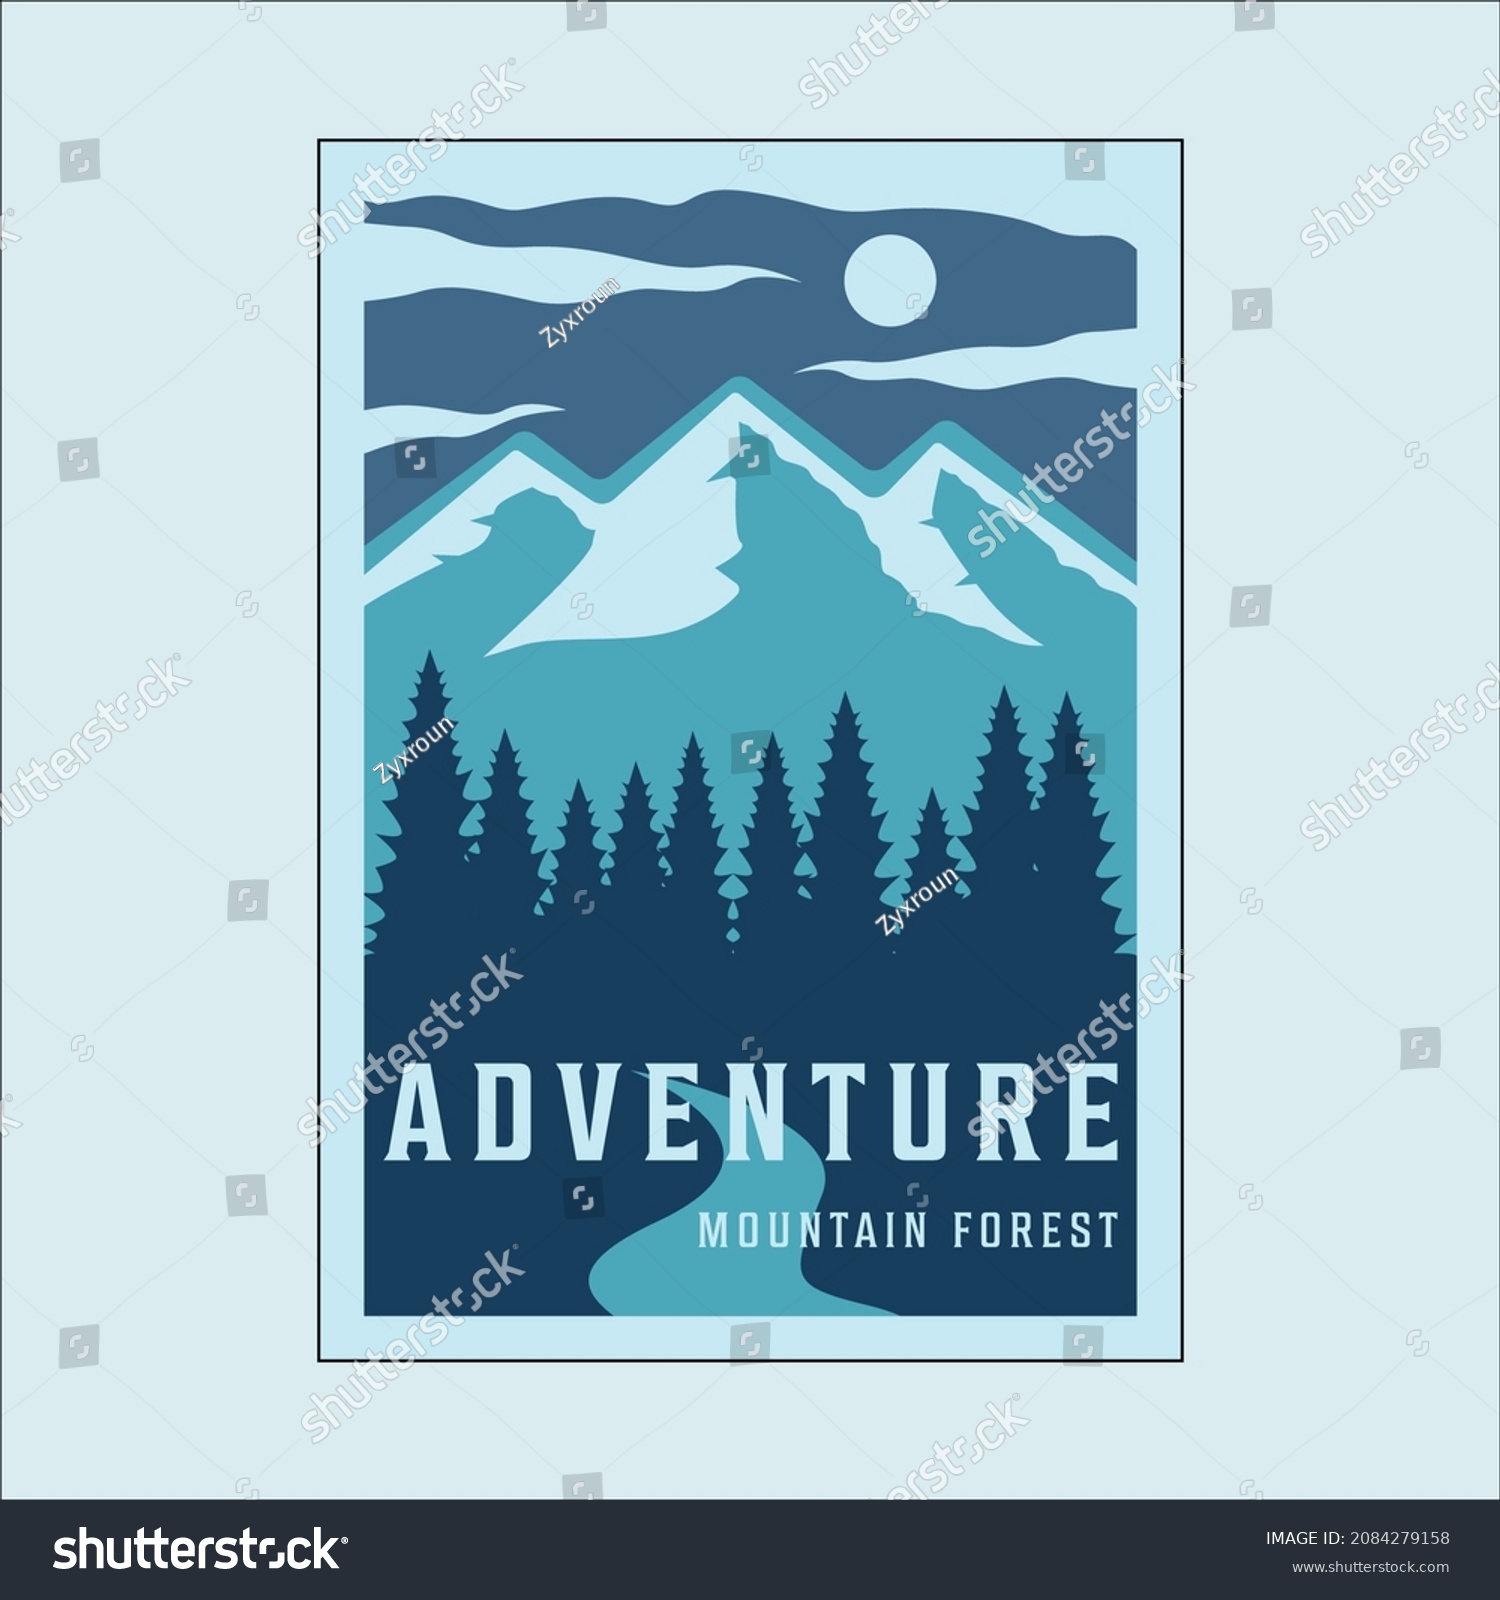 SVG of mountain and pines vintage minimalist poster vector illustration template design. adventure outdoor banner svg